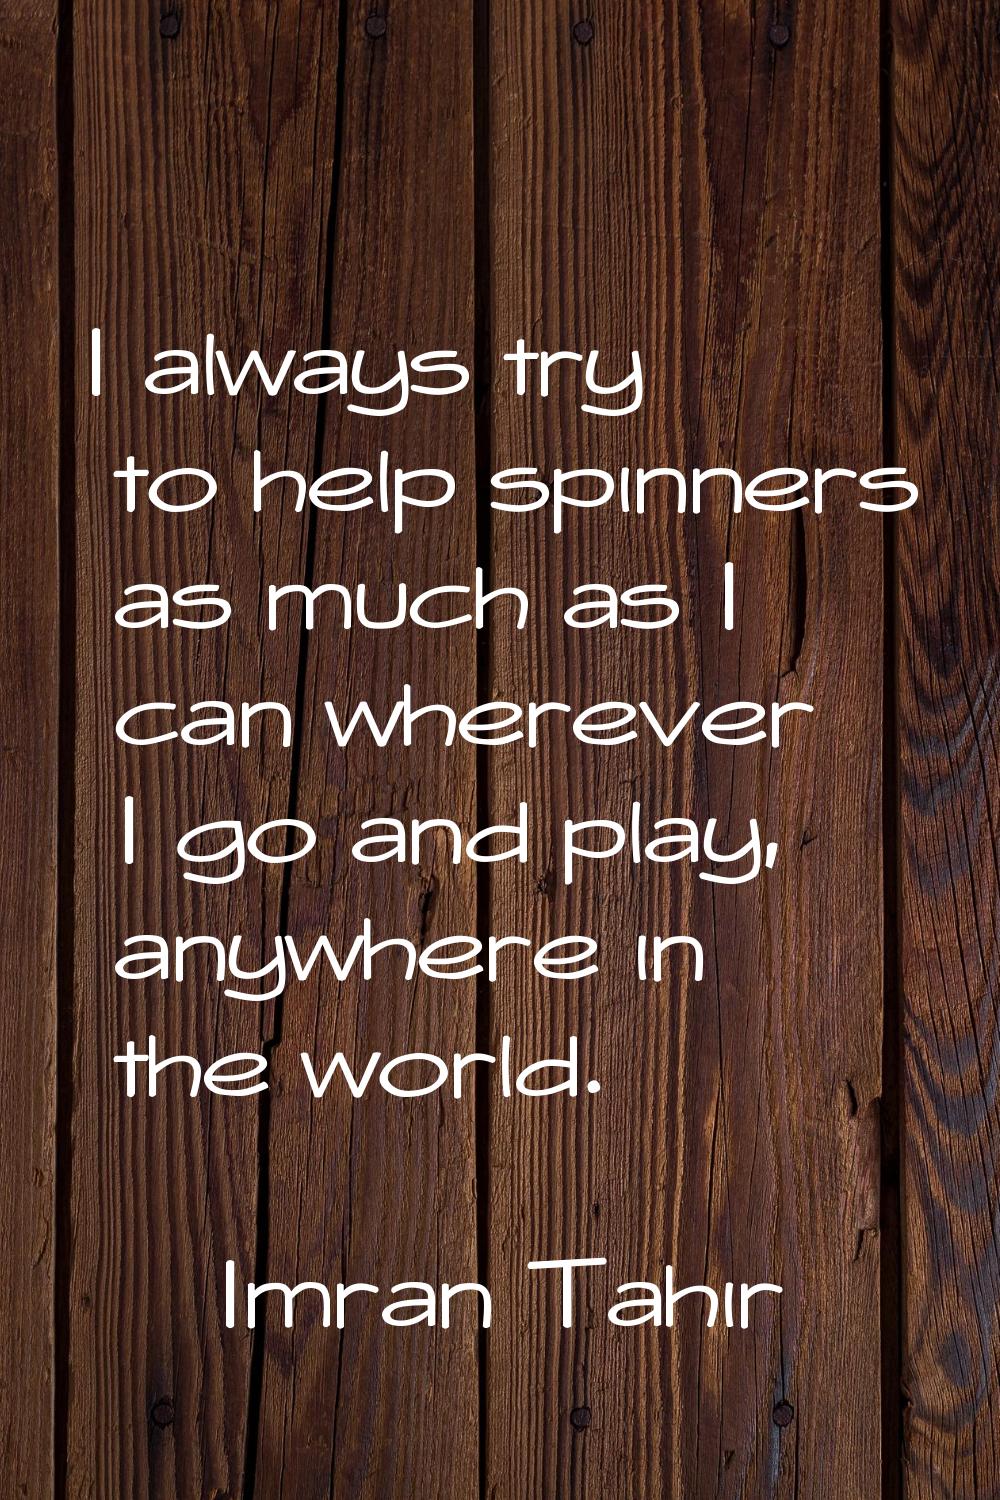 I always try to help spinners as much as I can wherever I go and play, anywhere in the world.